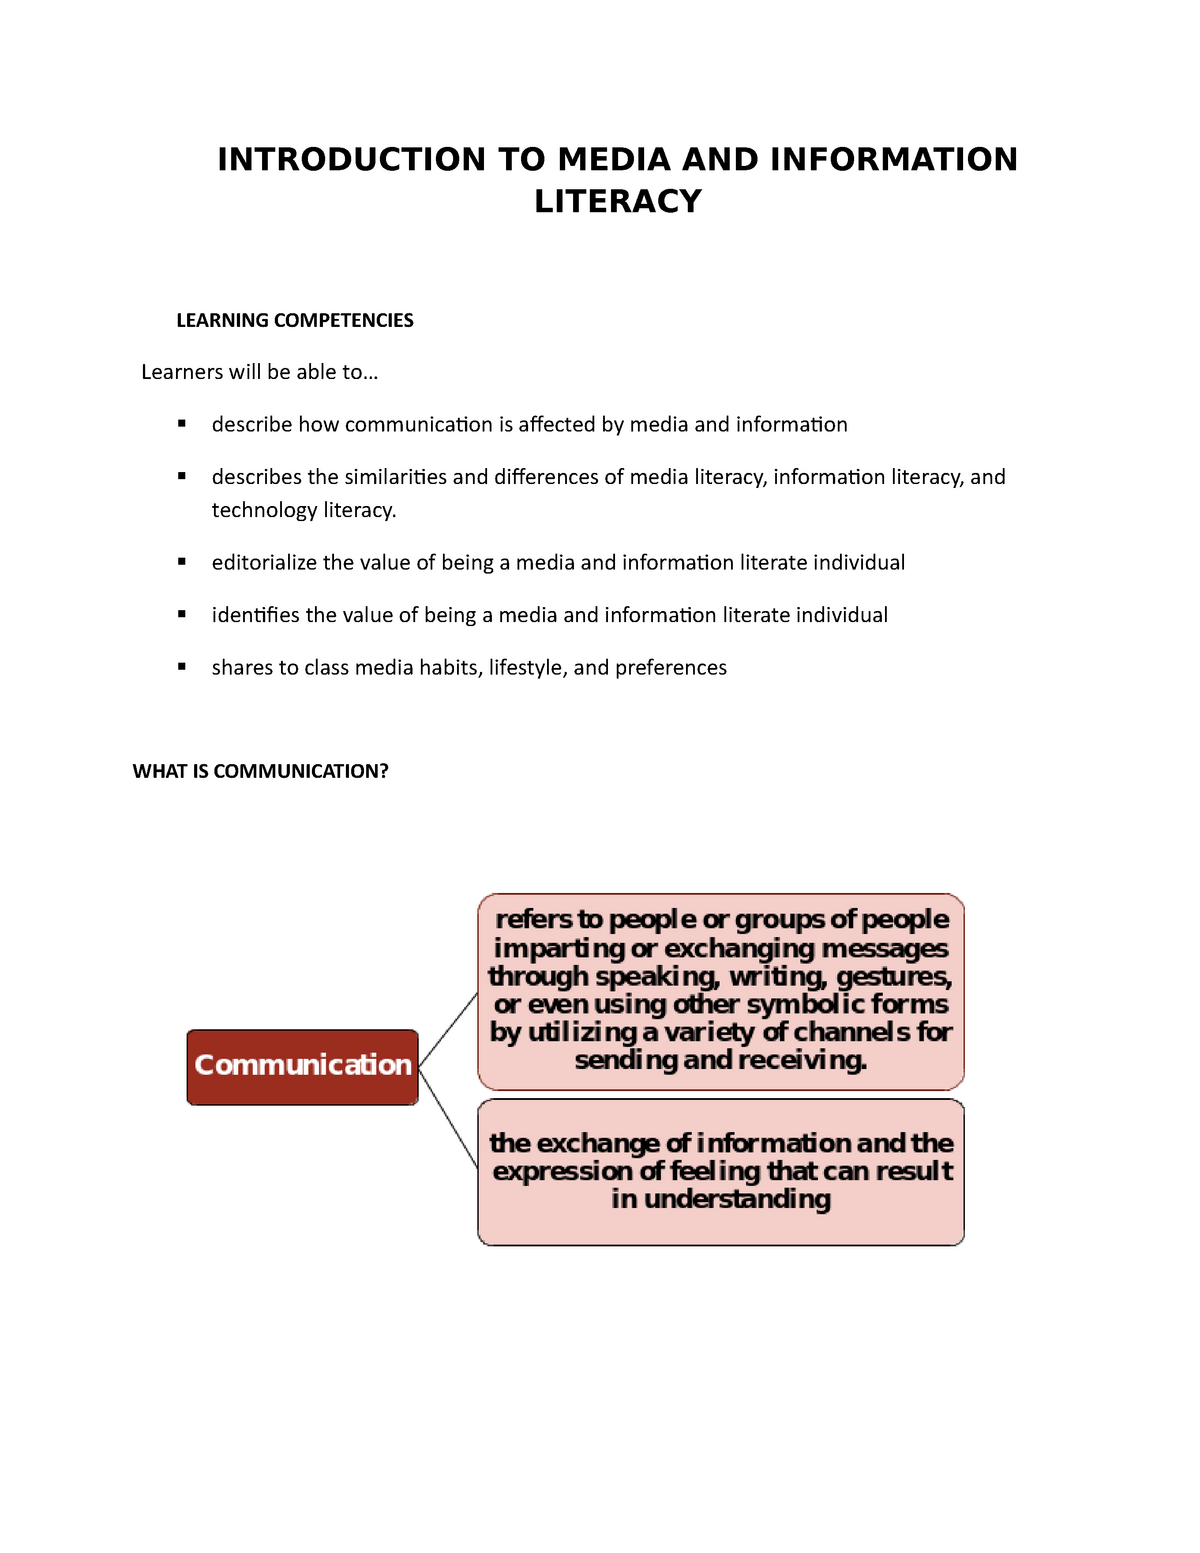 essay questions about media and information literacy